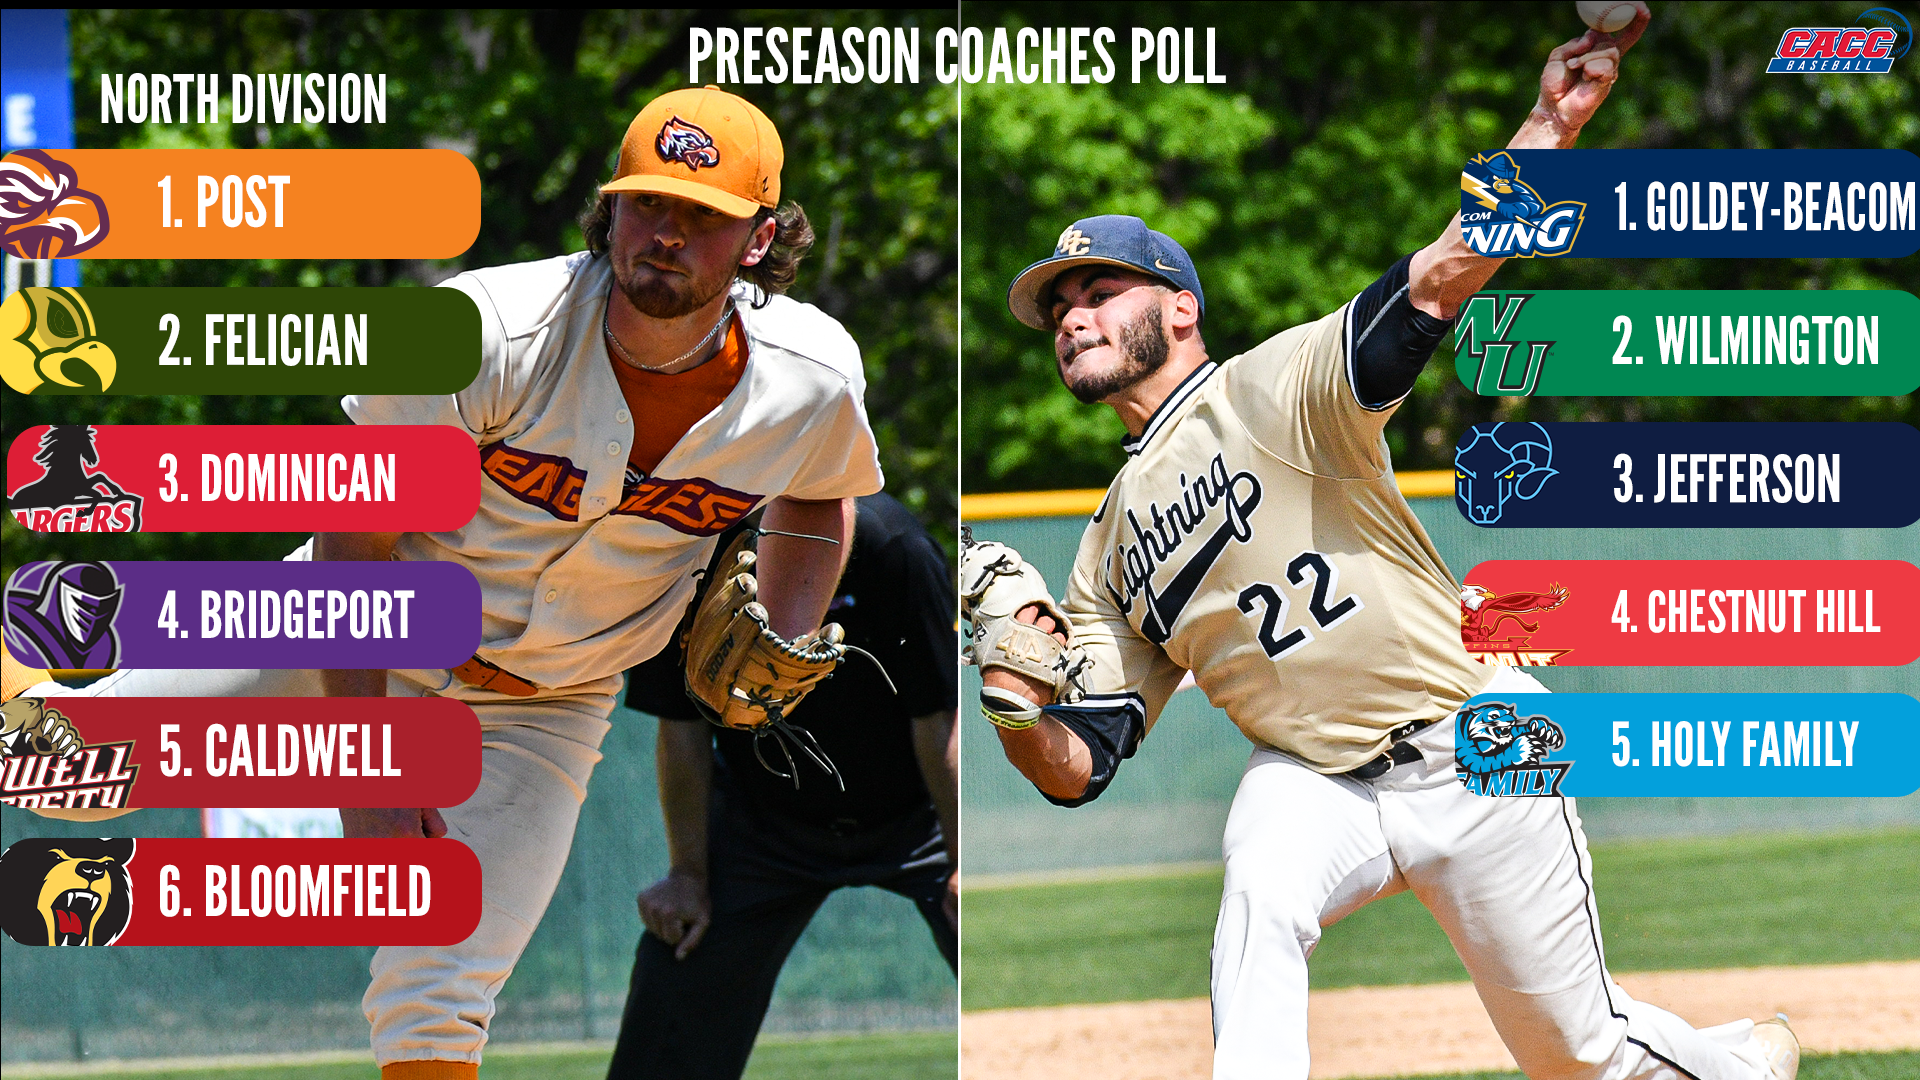 CHARGERS TABBED THIRD IN THE NORTH IN THE CACC BASEBALL PRESEASON POLL